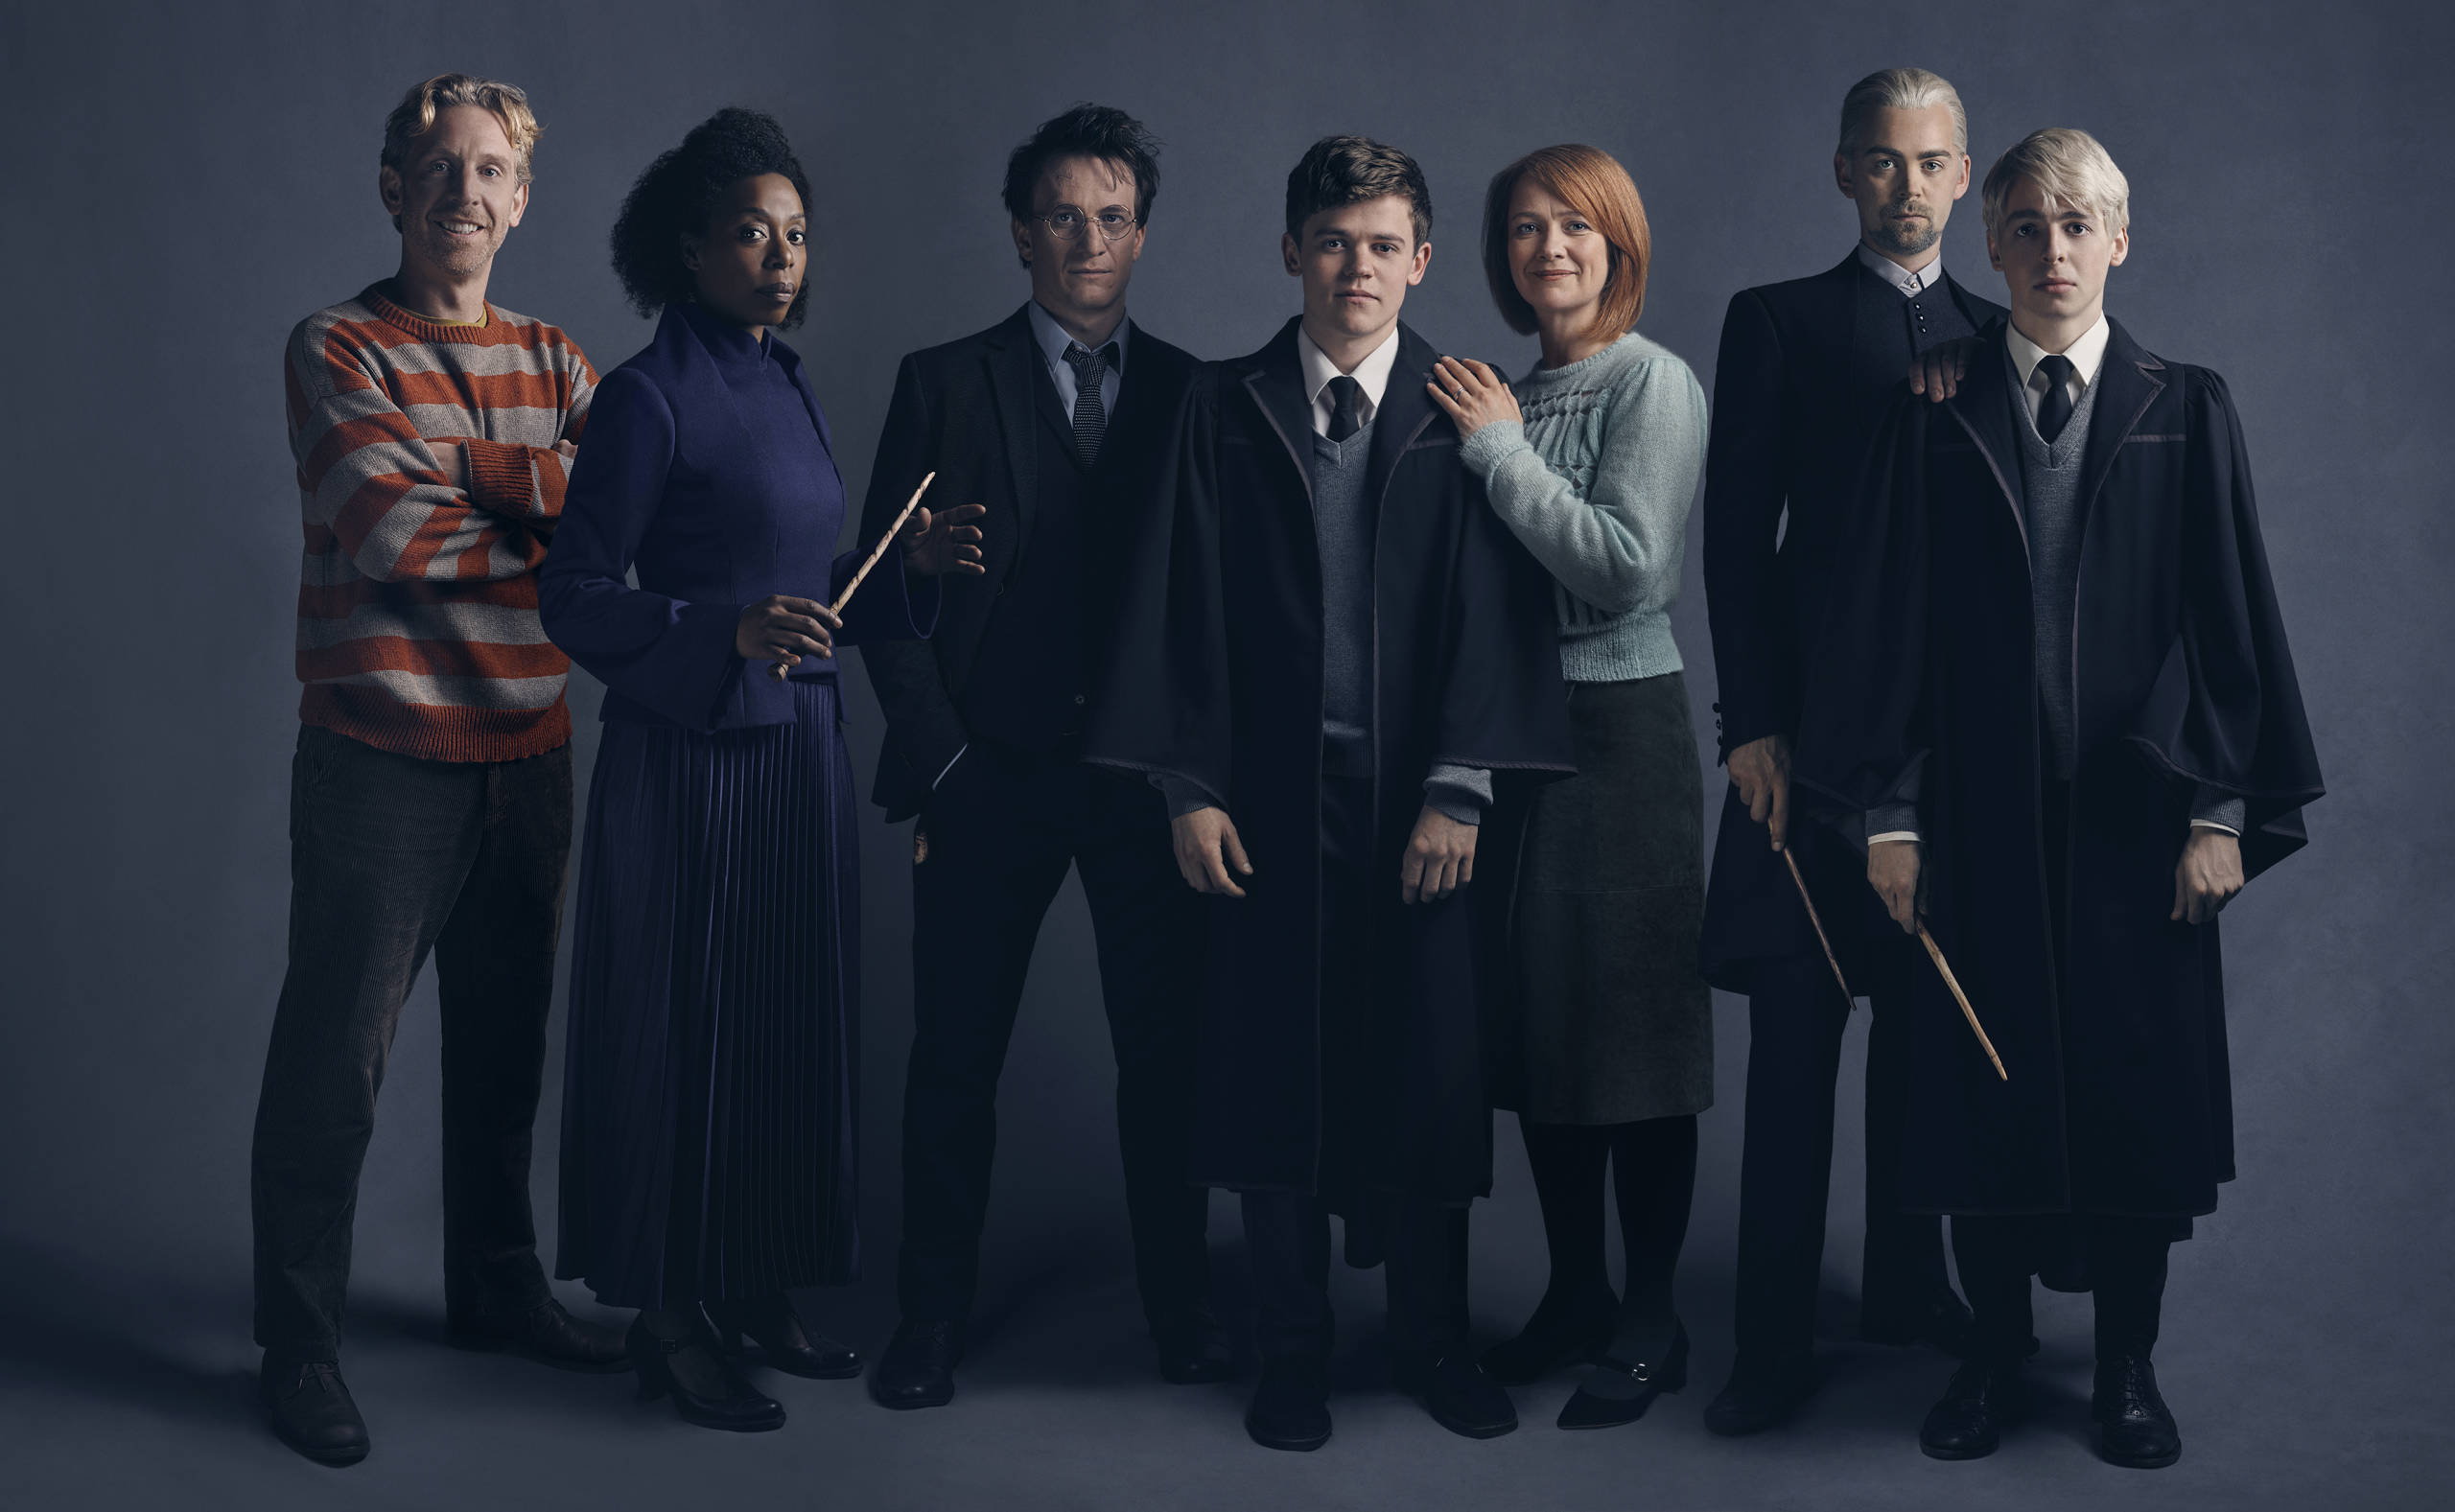 Members of the Broadway Premiere cast of Harry Potter and the Cursed Child. Photography by Charlie Gray